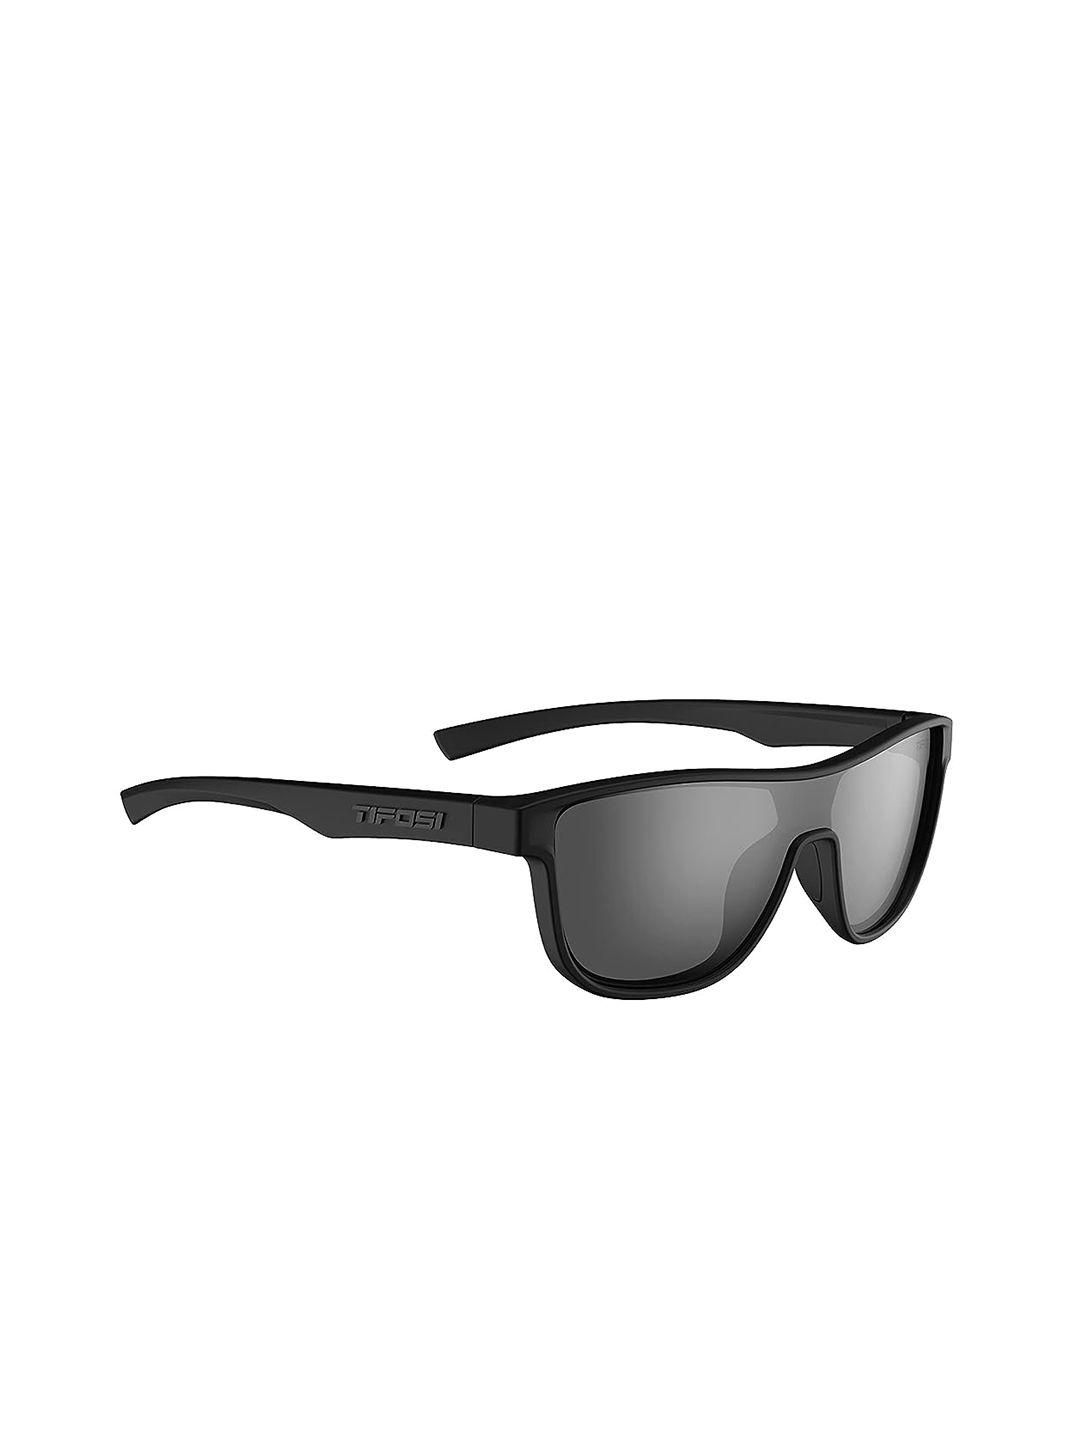 tifosi unisex black lens & black sports sunglasses with polarised and uv protected lens